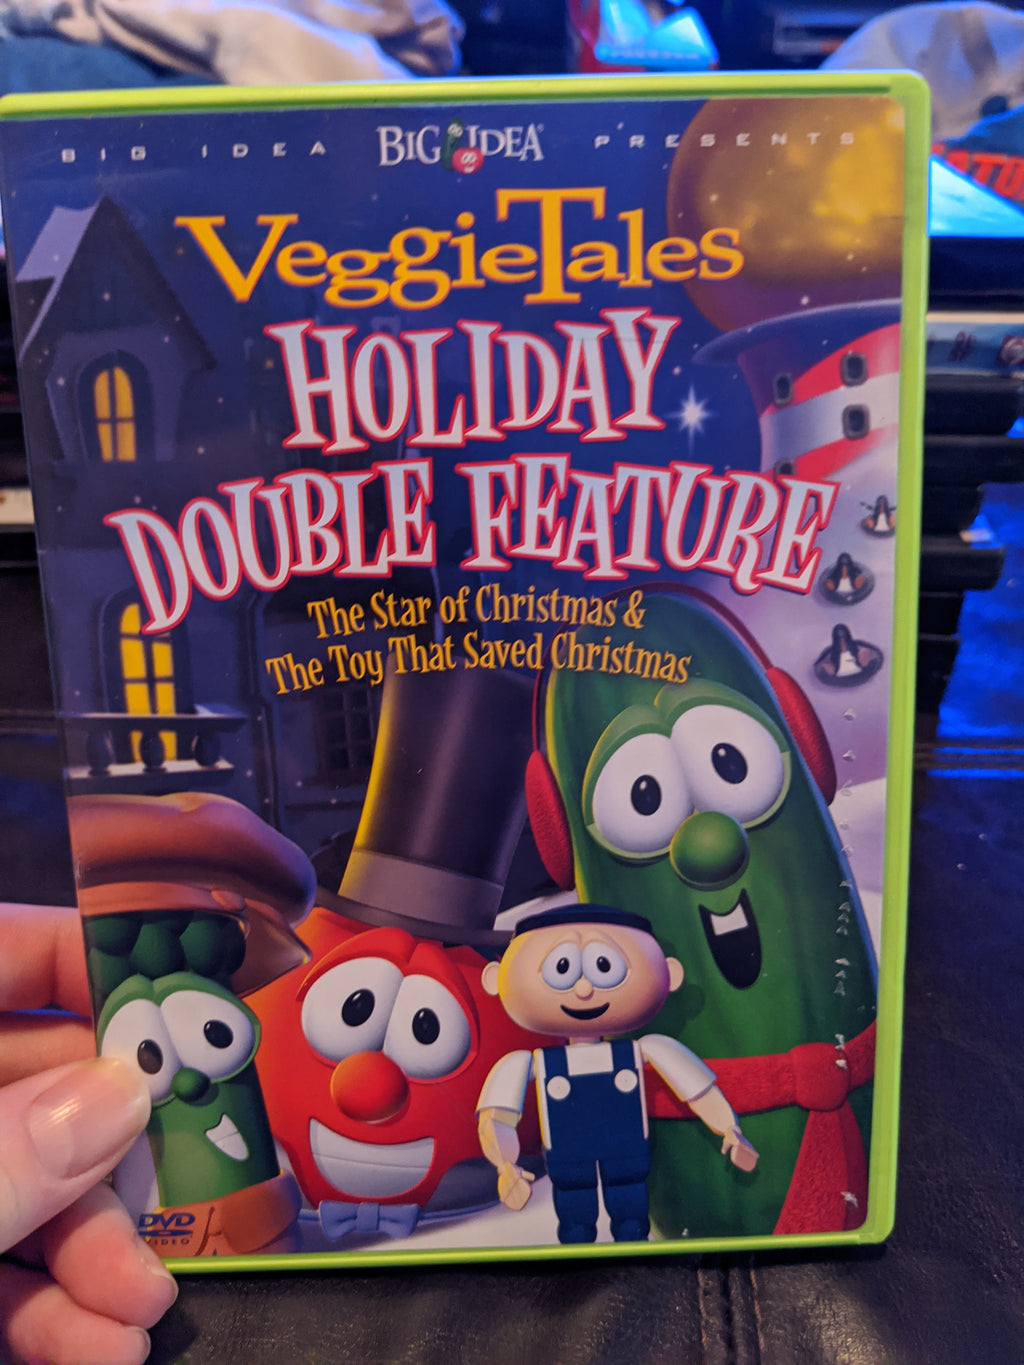 Veggie Tales Holiday Double Feature - The Star of Christmas & Toy Saved Christmas